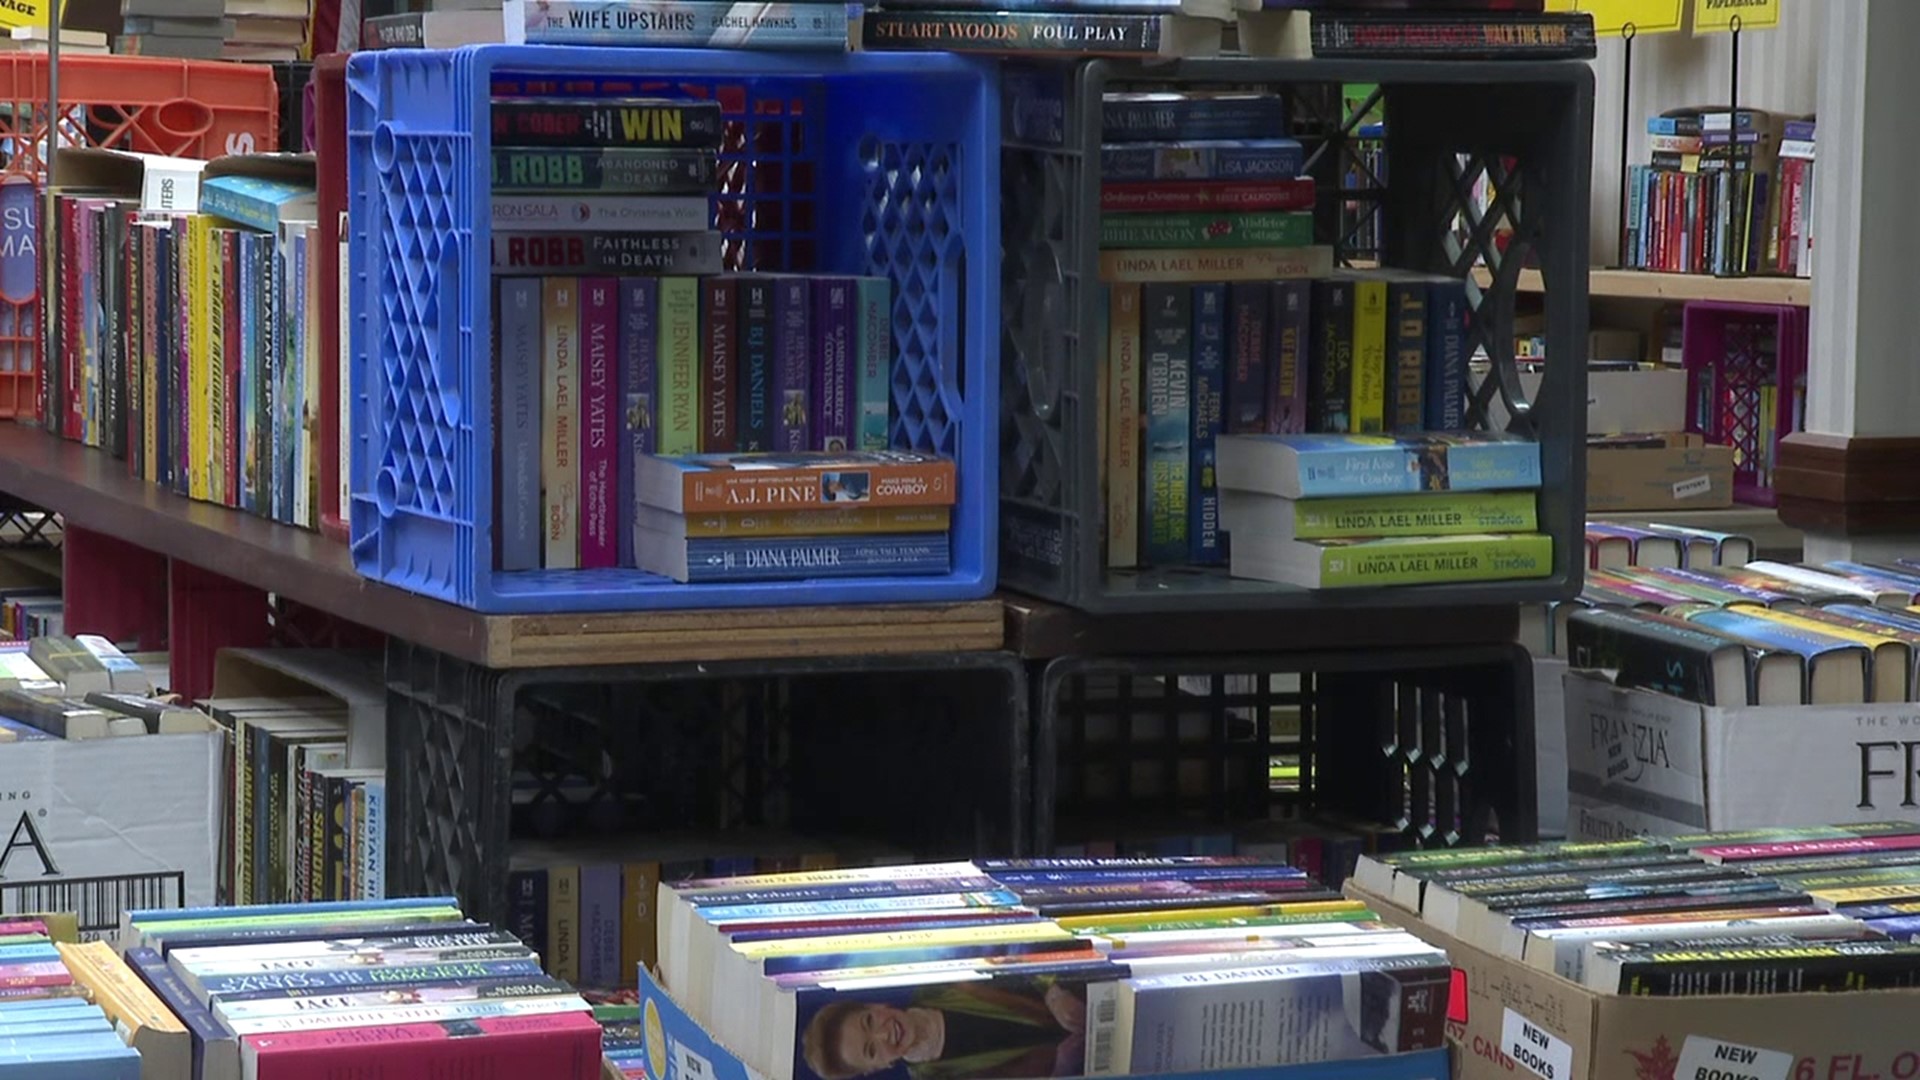 The Friends of the Eastern Monroe Public Library are hosting its annual used book sale this weekend at the Hughes Library in Stroudsburg.